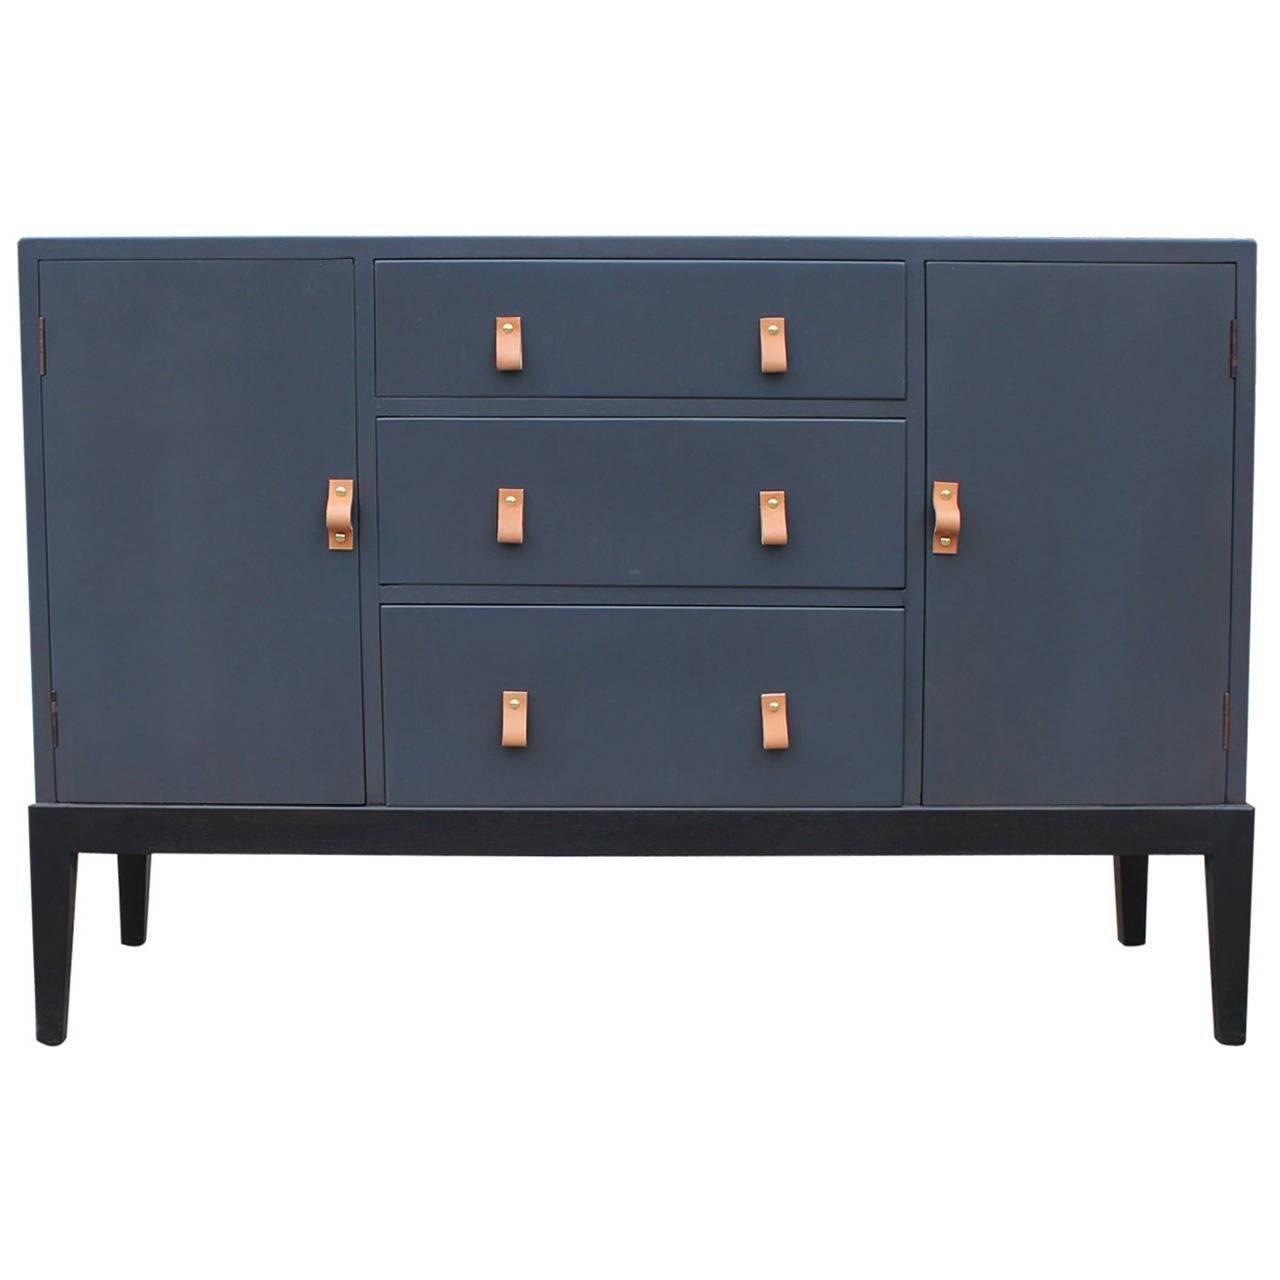 Superb Grey Sideboard Or Buffet With Leather Handles At 1stdibs Intended For Grey Sideboards (View 3 of 15)